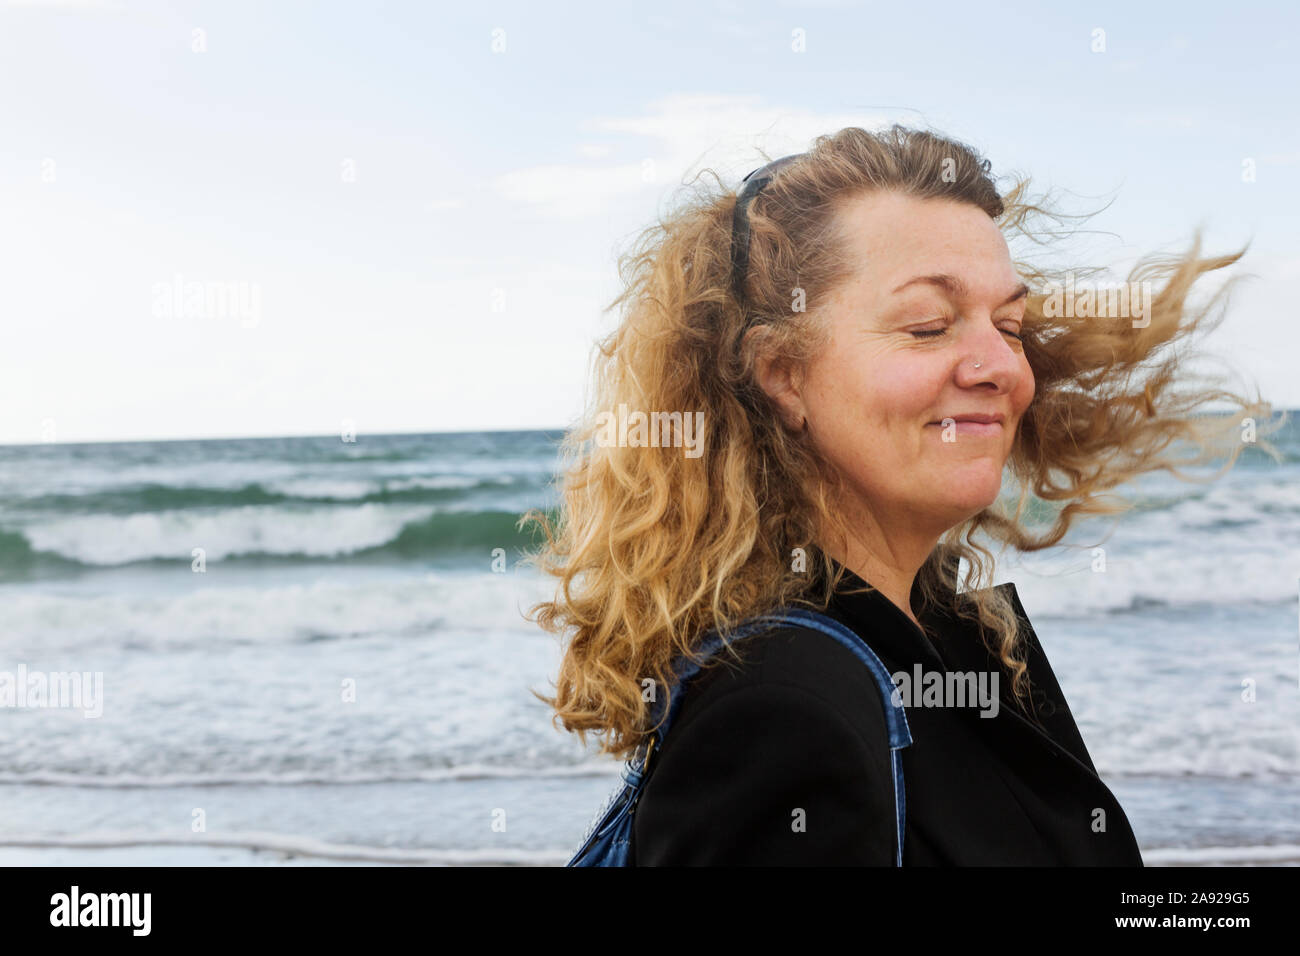 A woman by the sea with hair moving in the wind Stock Photo